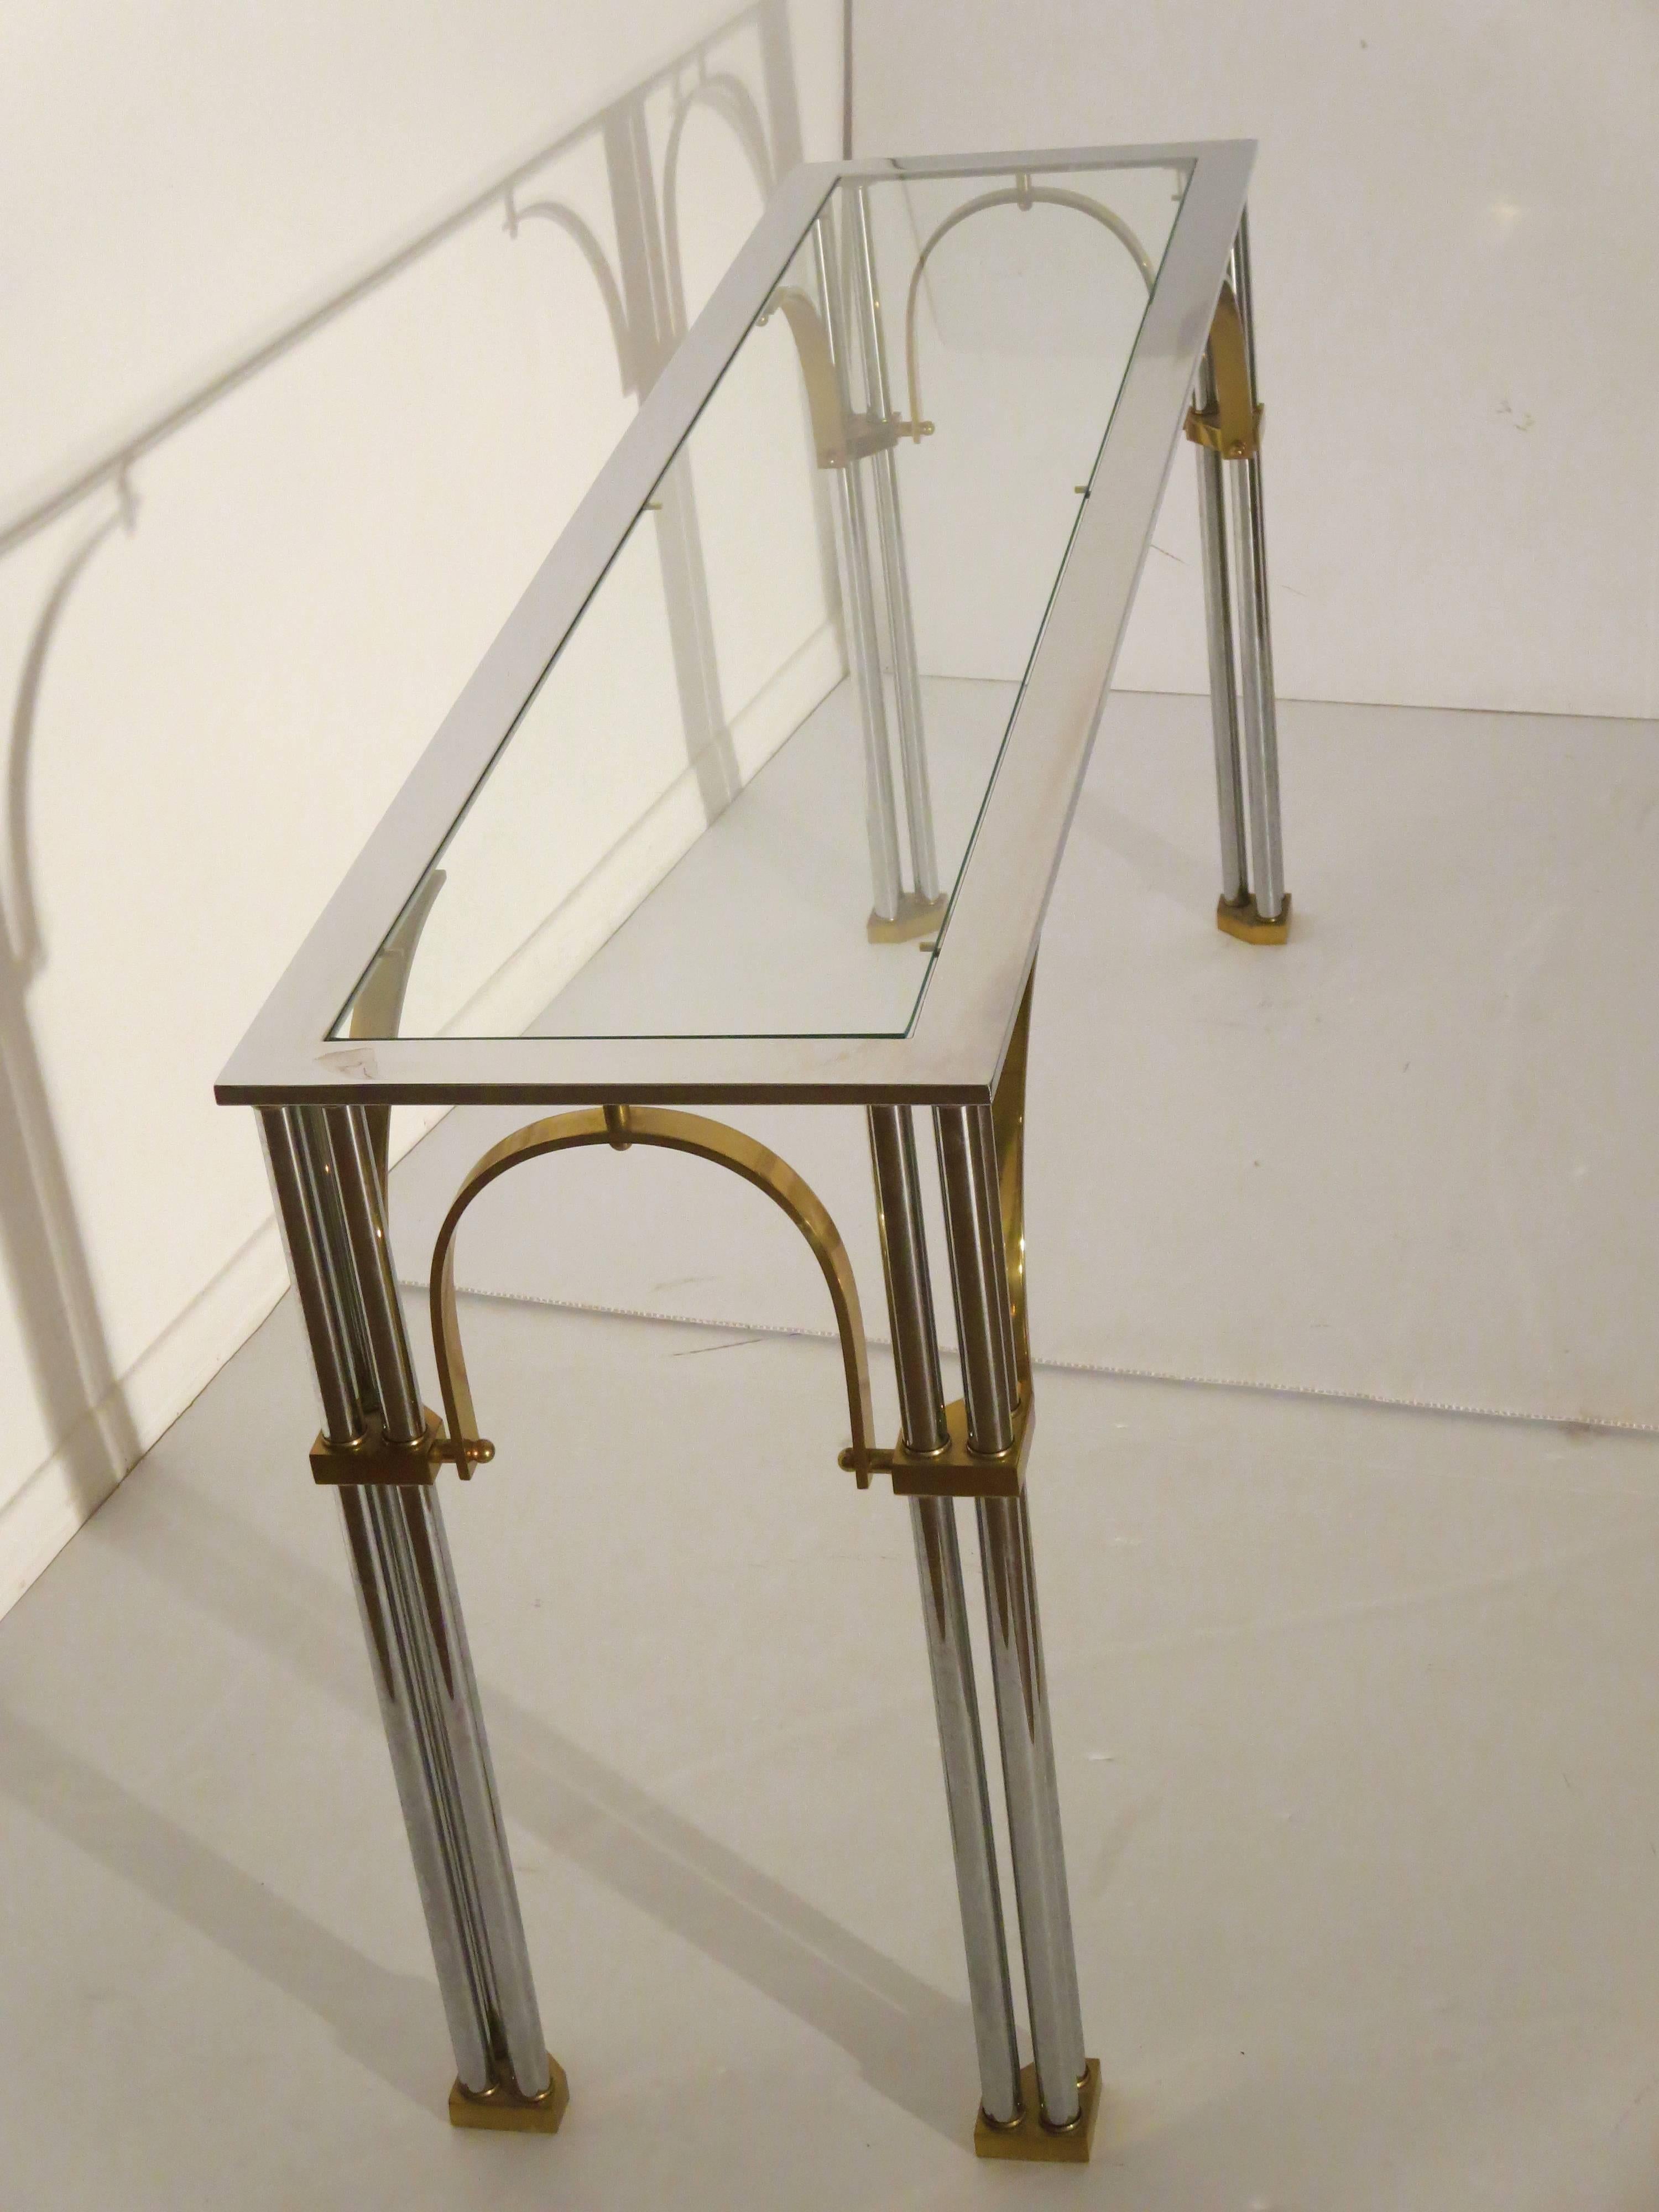 Striking Chrome and Brass with Glass Top Console or Sofa Table by Milo Baughman 1